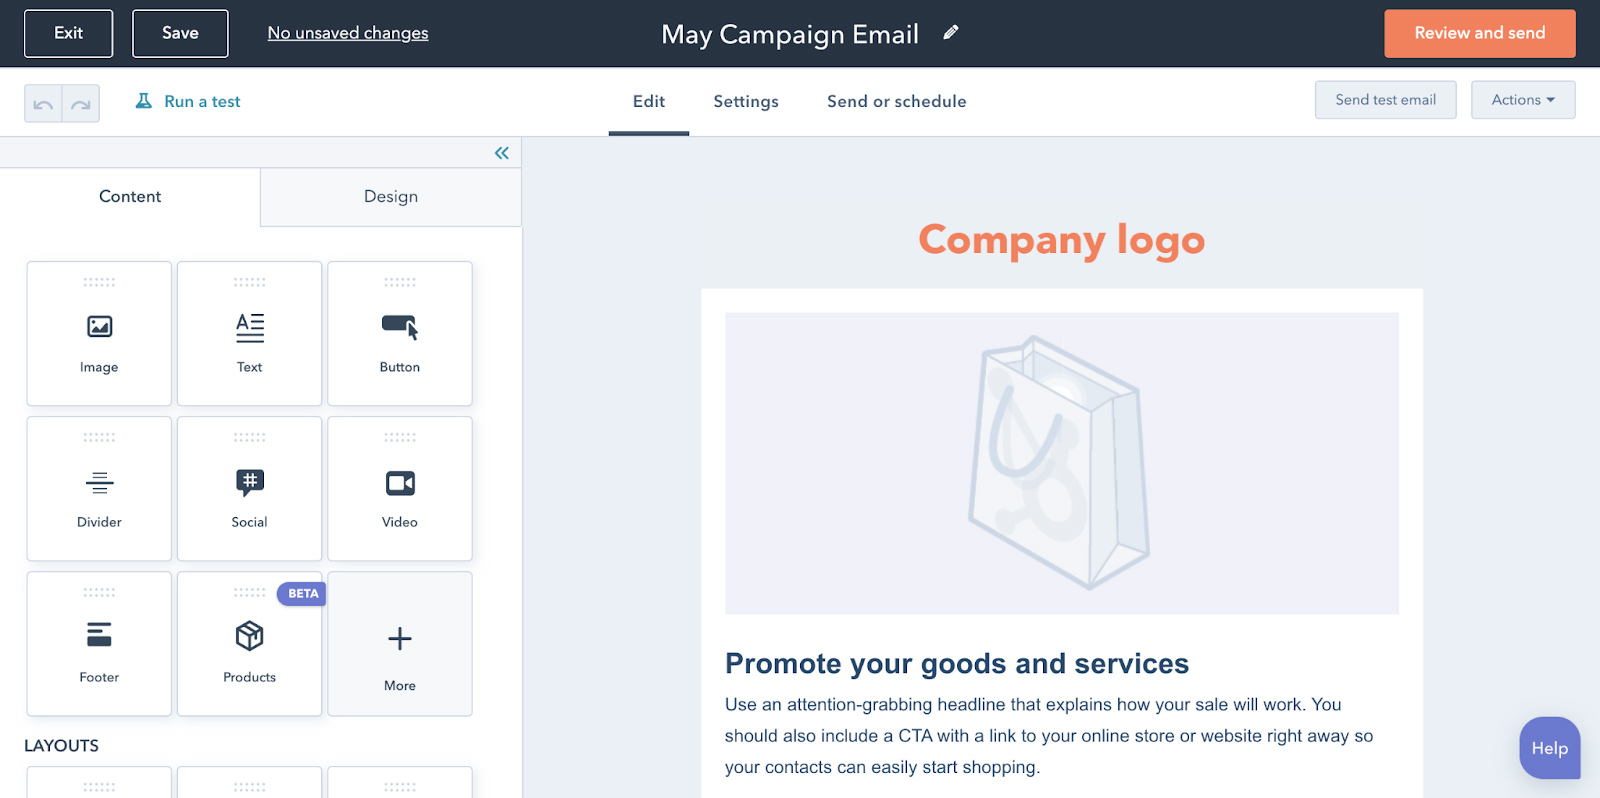 HubSpot CRM email campaign builder.